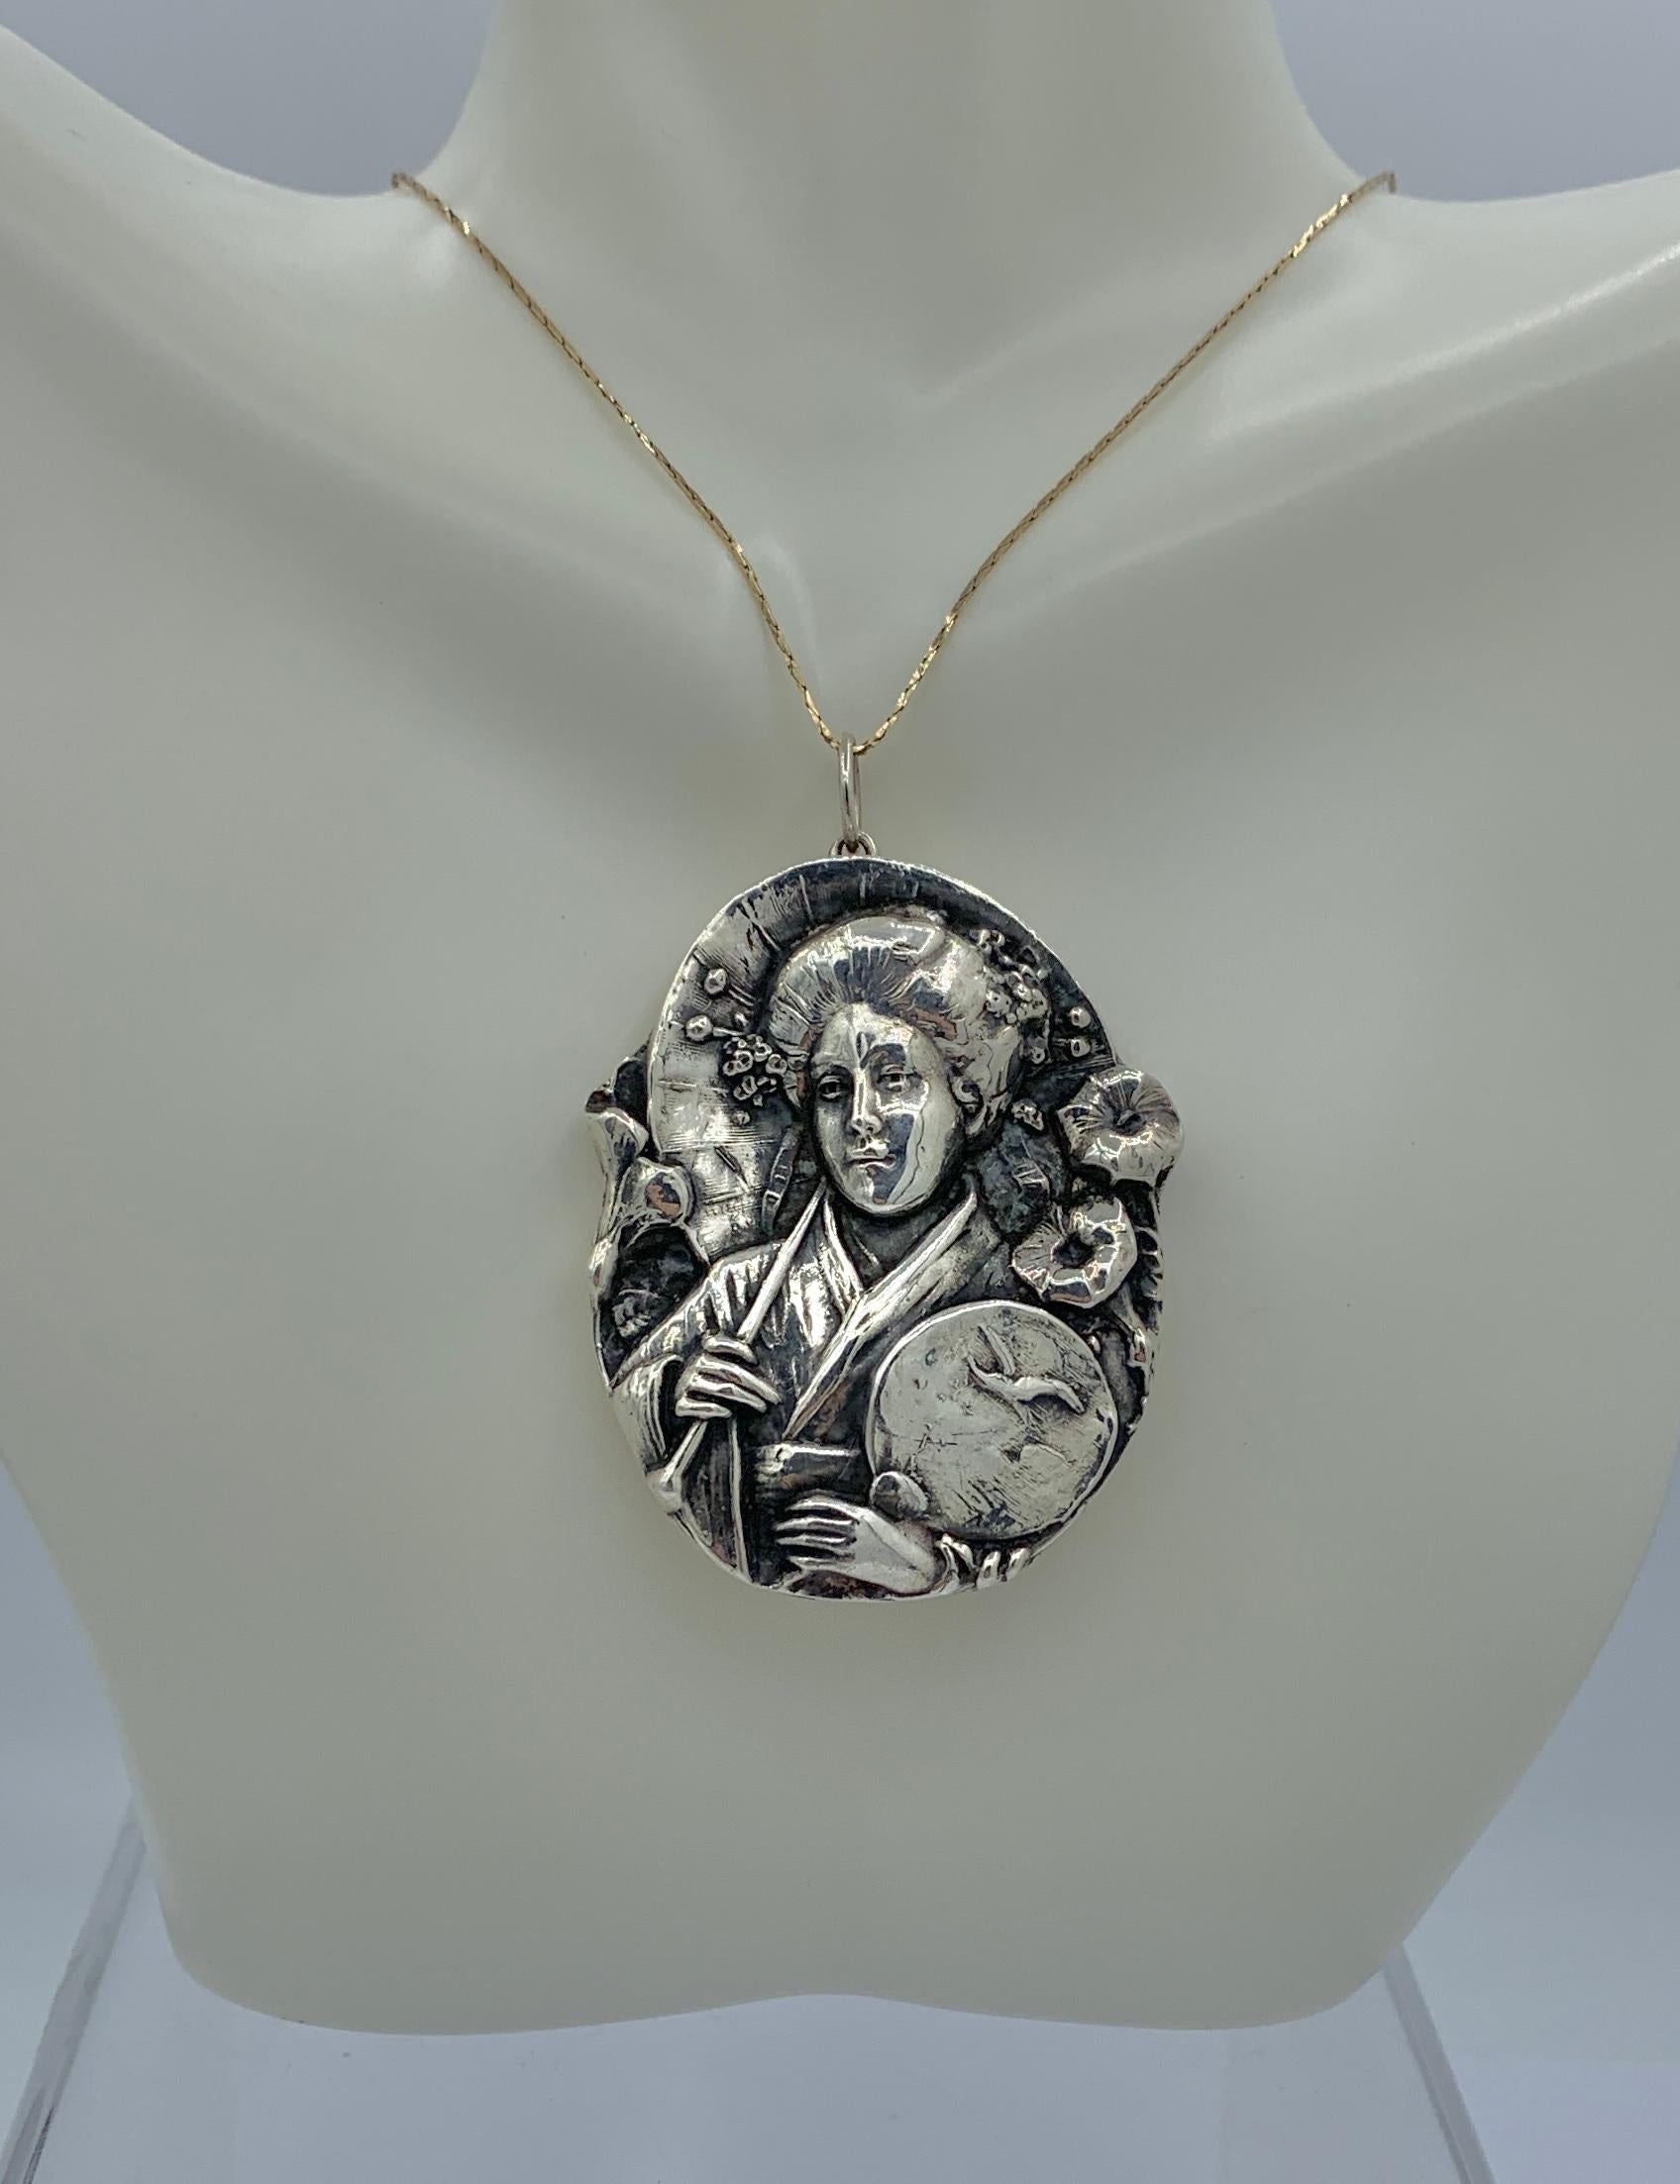 This is a stunning Sterling Silver pendant by Henryk Winograd featuring a gorgeous deep repousse image of a Japanese Geisha with her fan adorned with a flying crane, flowers and stunning hair adornments.  The pendant is in the gorgeous nature